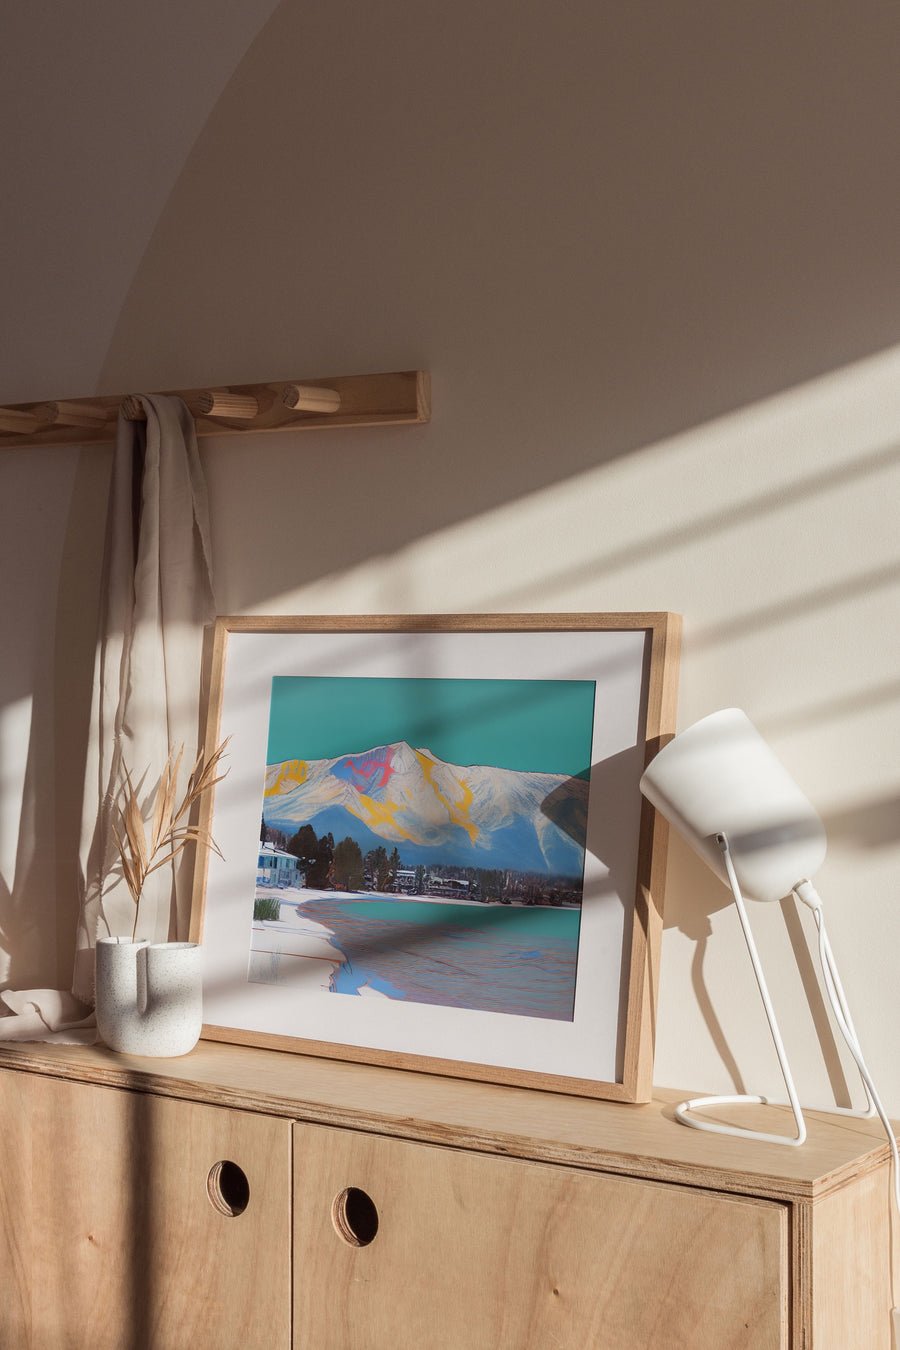 How Lake Tahoe wall art can help bring positive vibes and memories